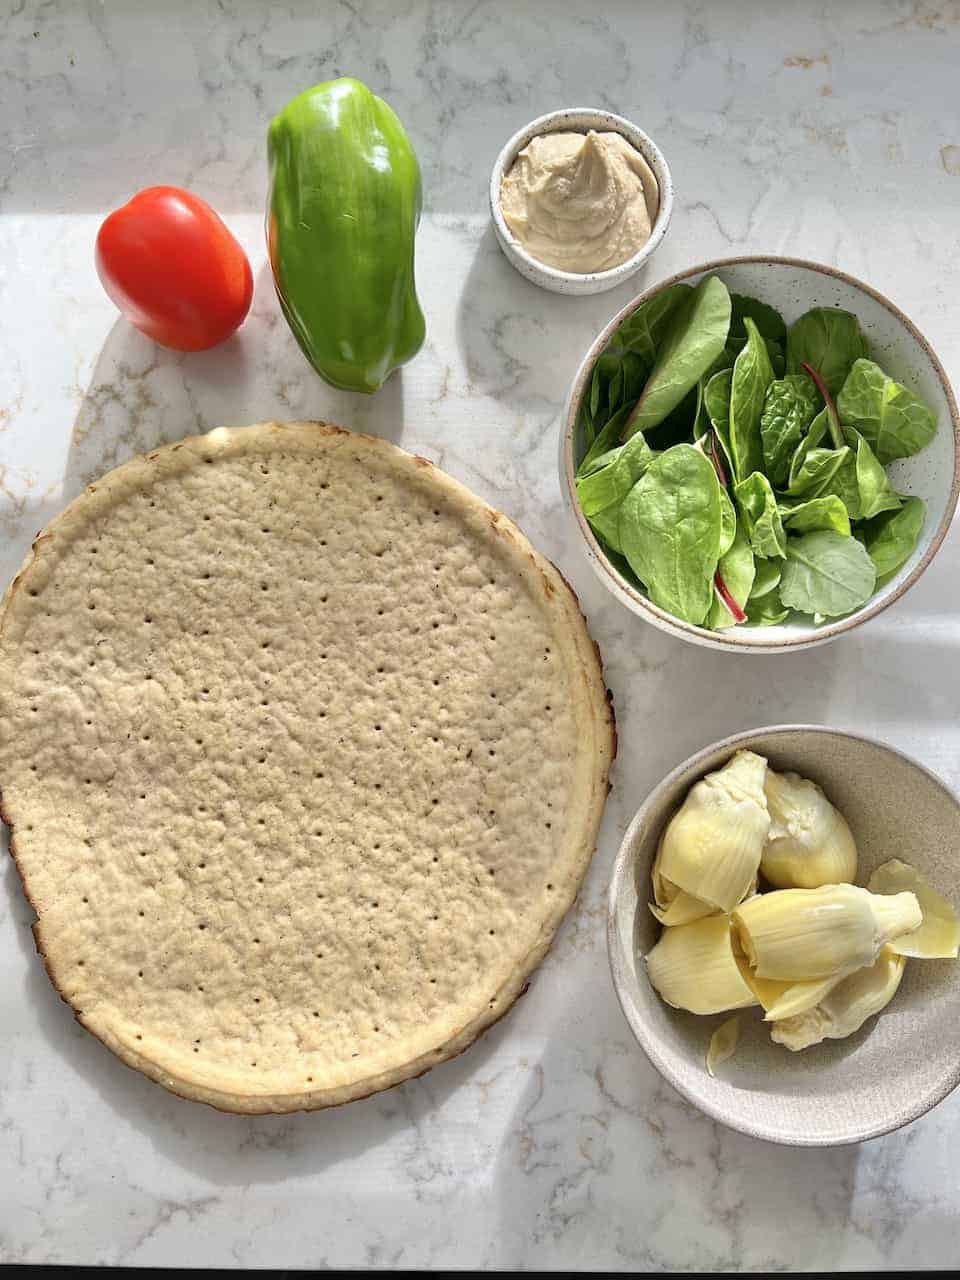 ingredients measured out for hummus pizza on white surface